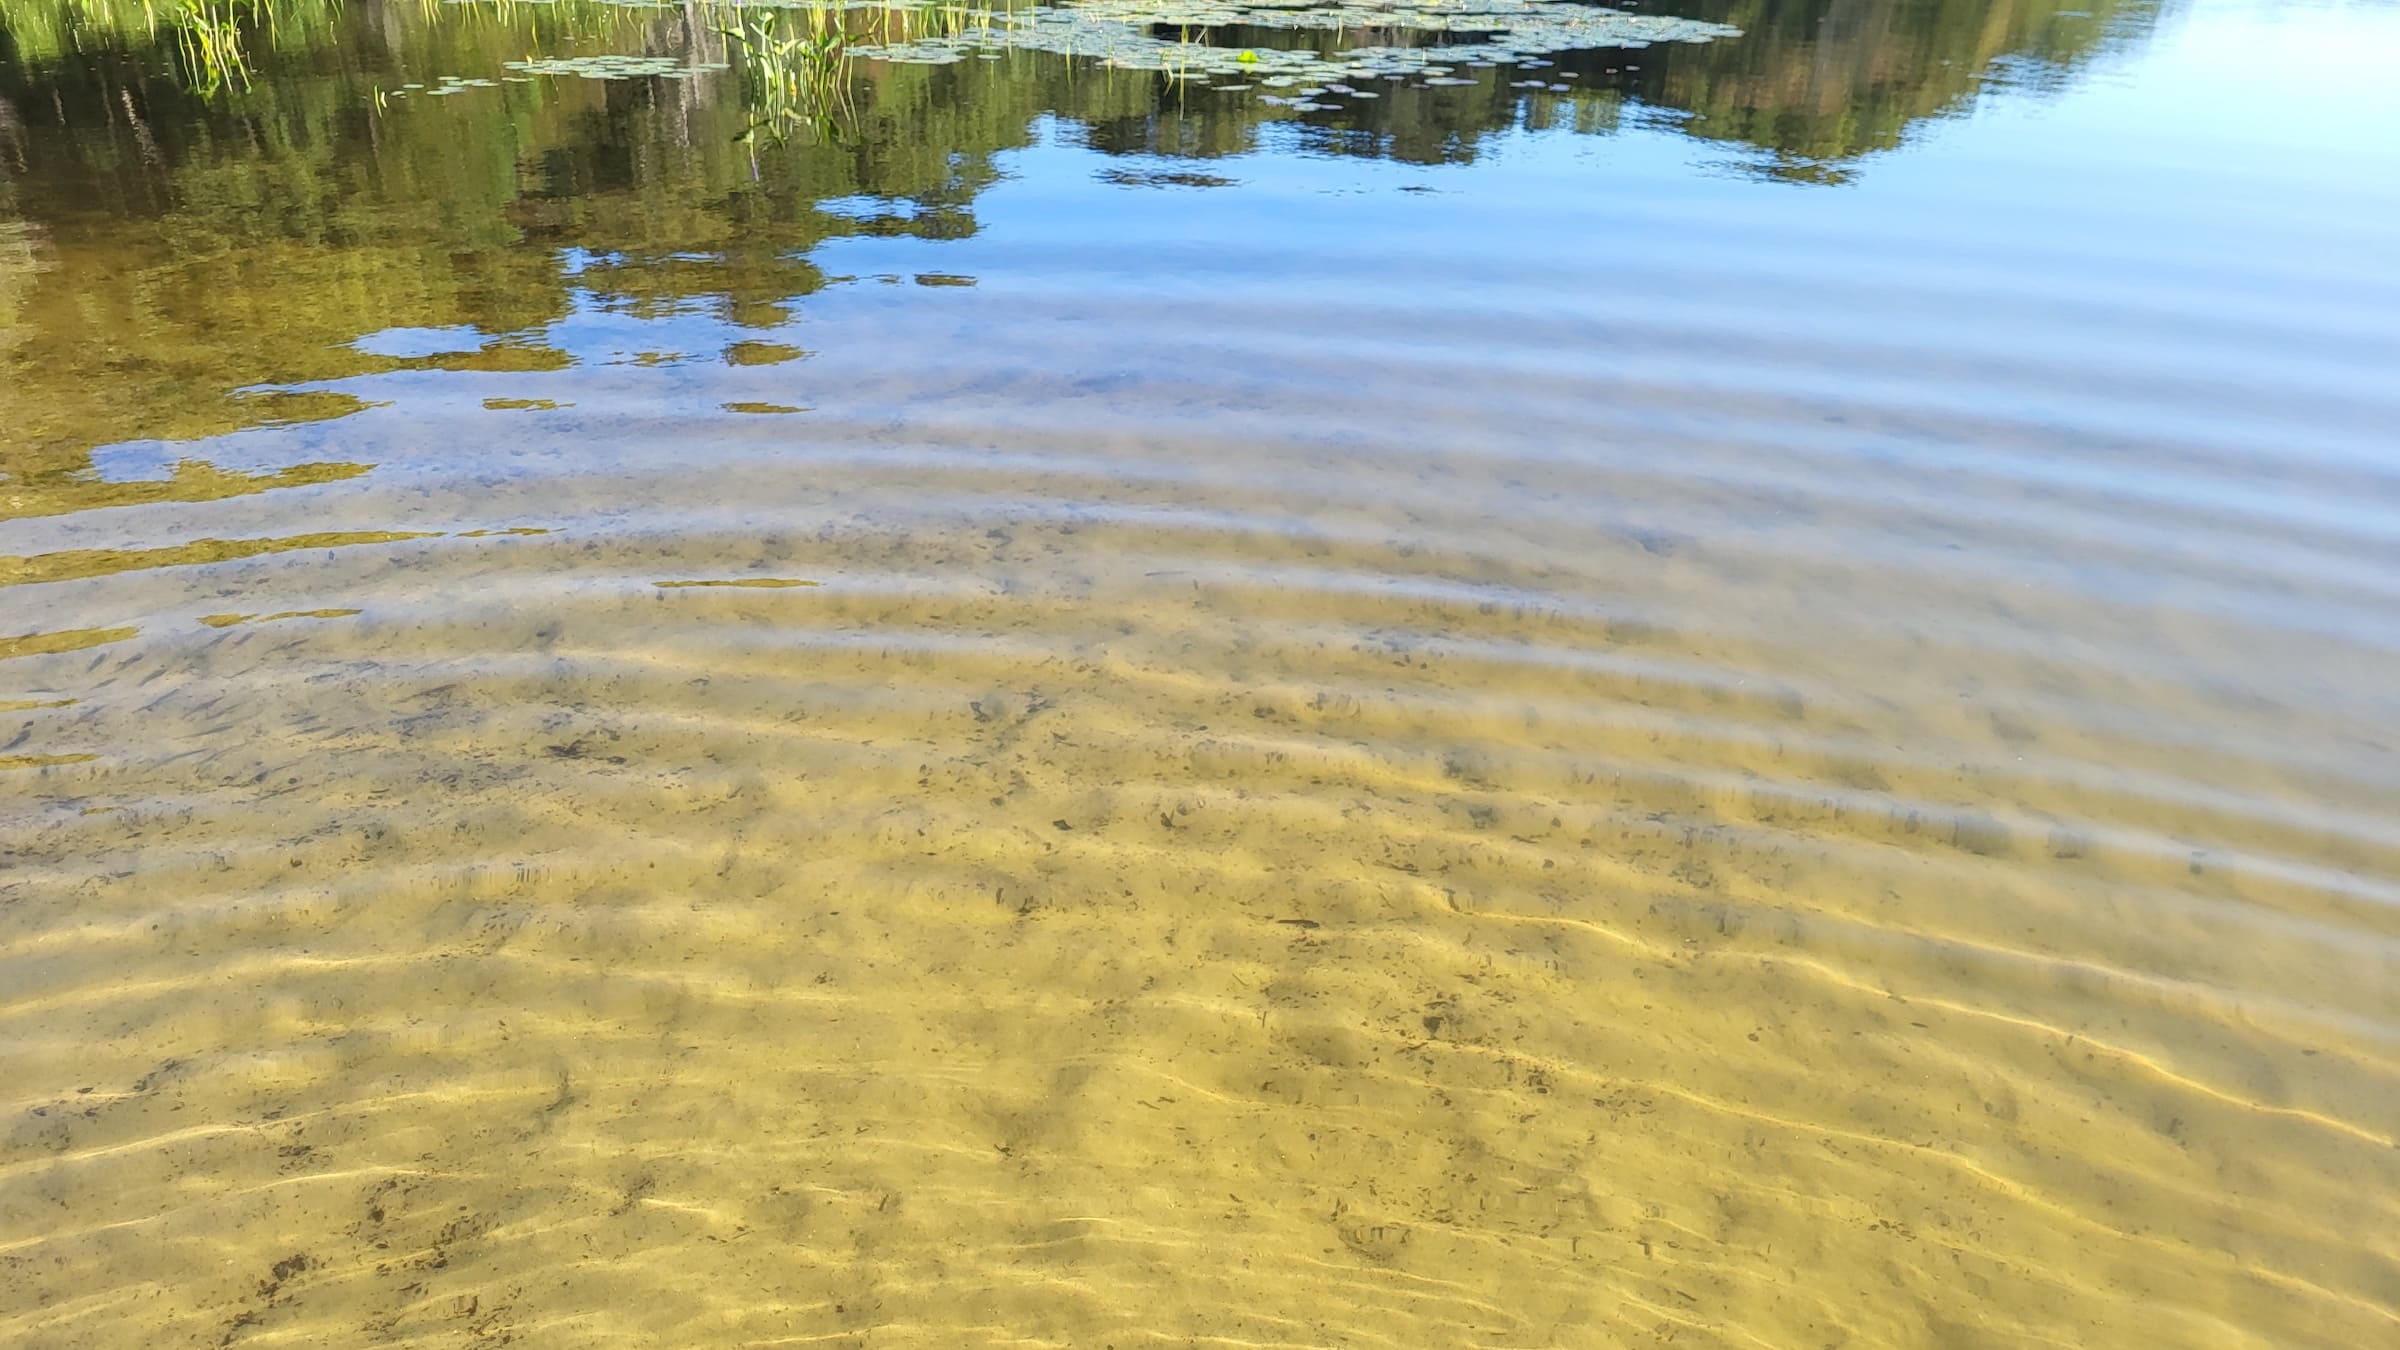 Rippling pond. Blue water over yellow sand.